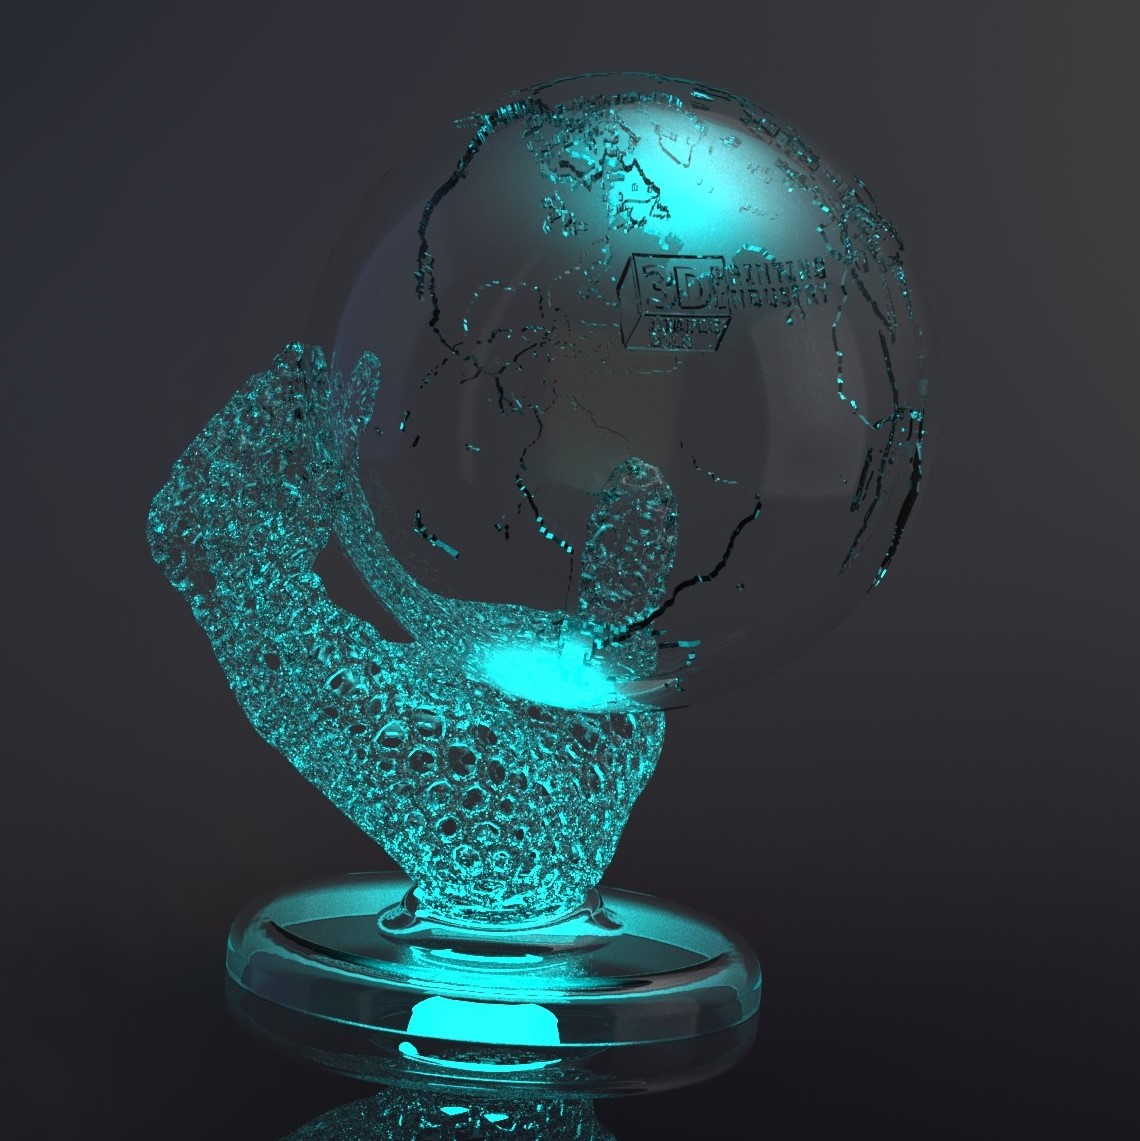 Earth 3DPI Awards - TROPHY DESIGN COMPETITION